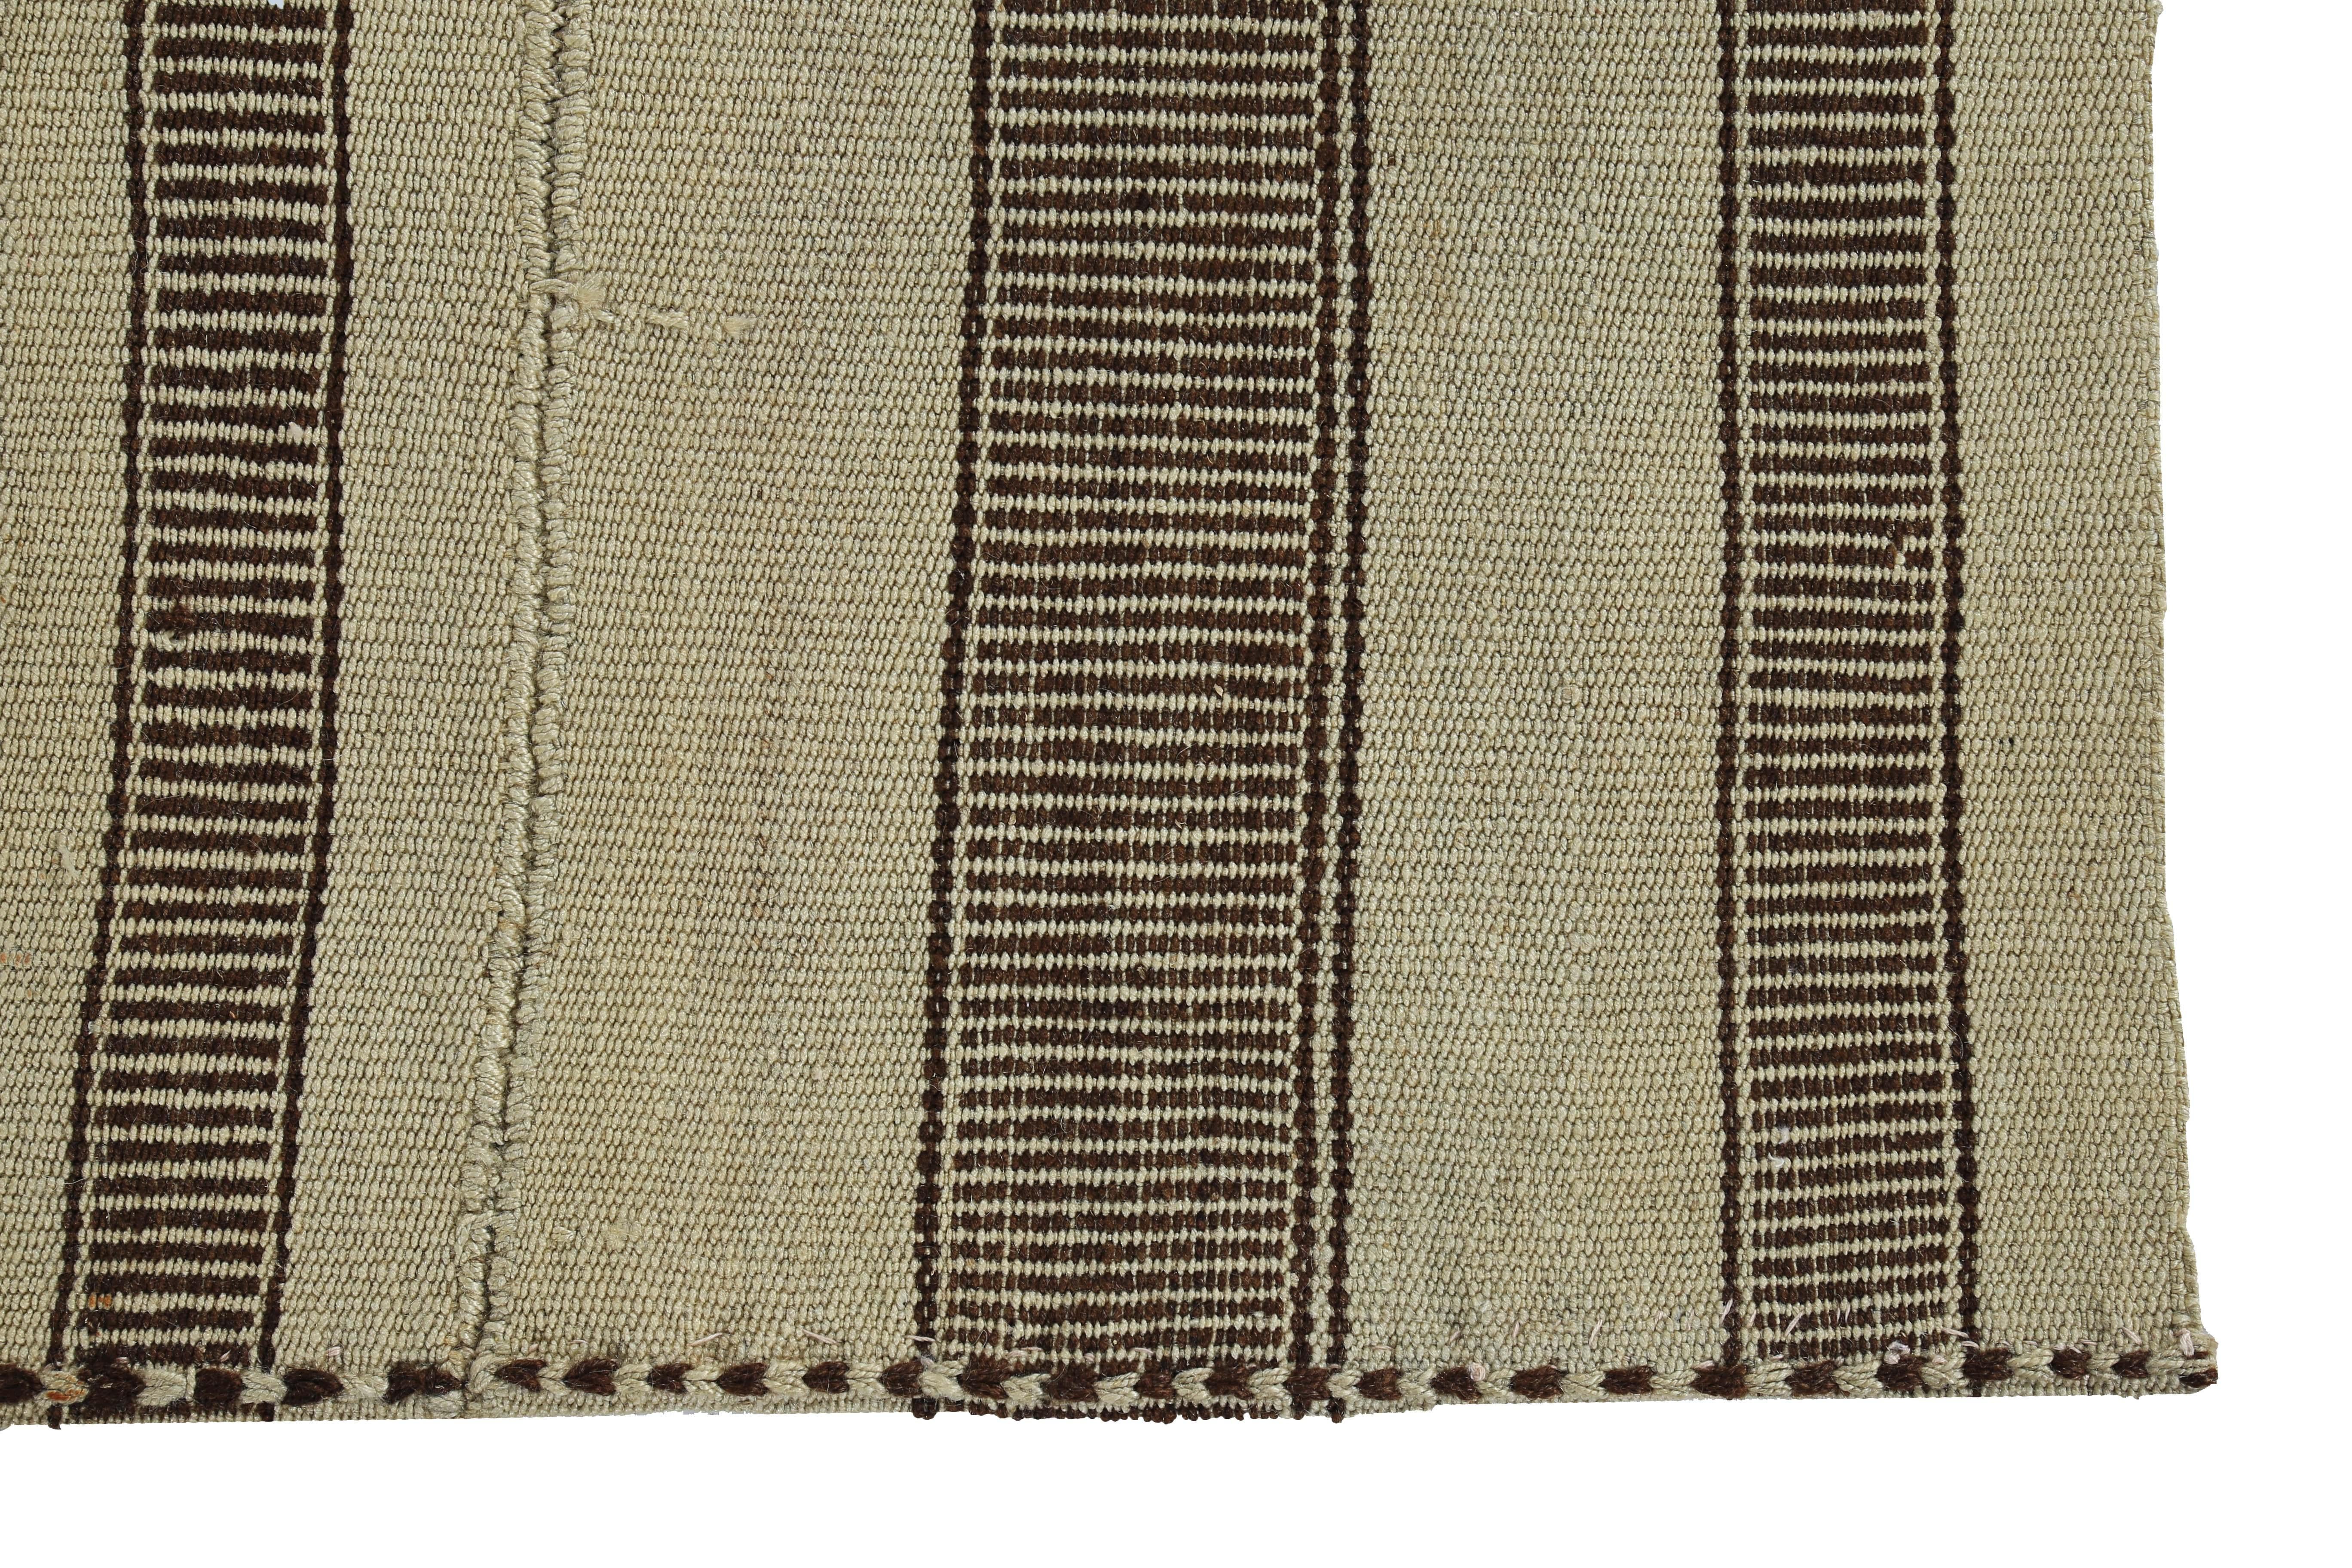 Hand-Woven Modern Turkish Kilim Rug with Brown Stripes on a Beige Field For Sale